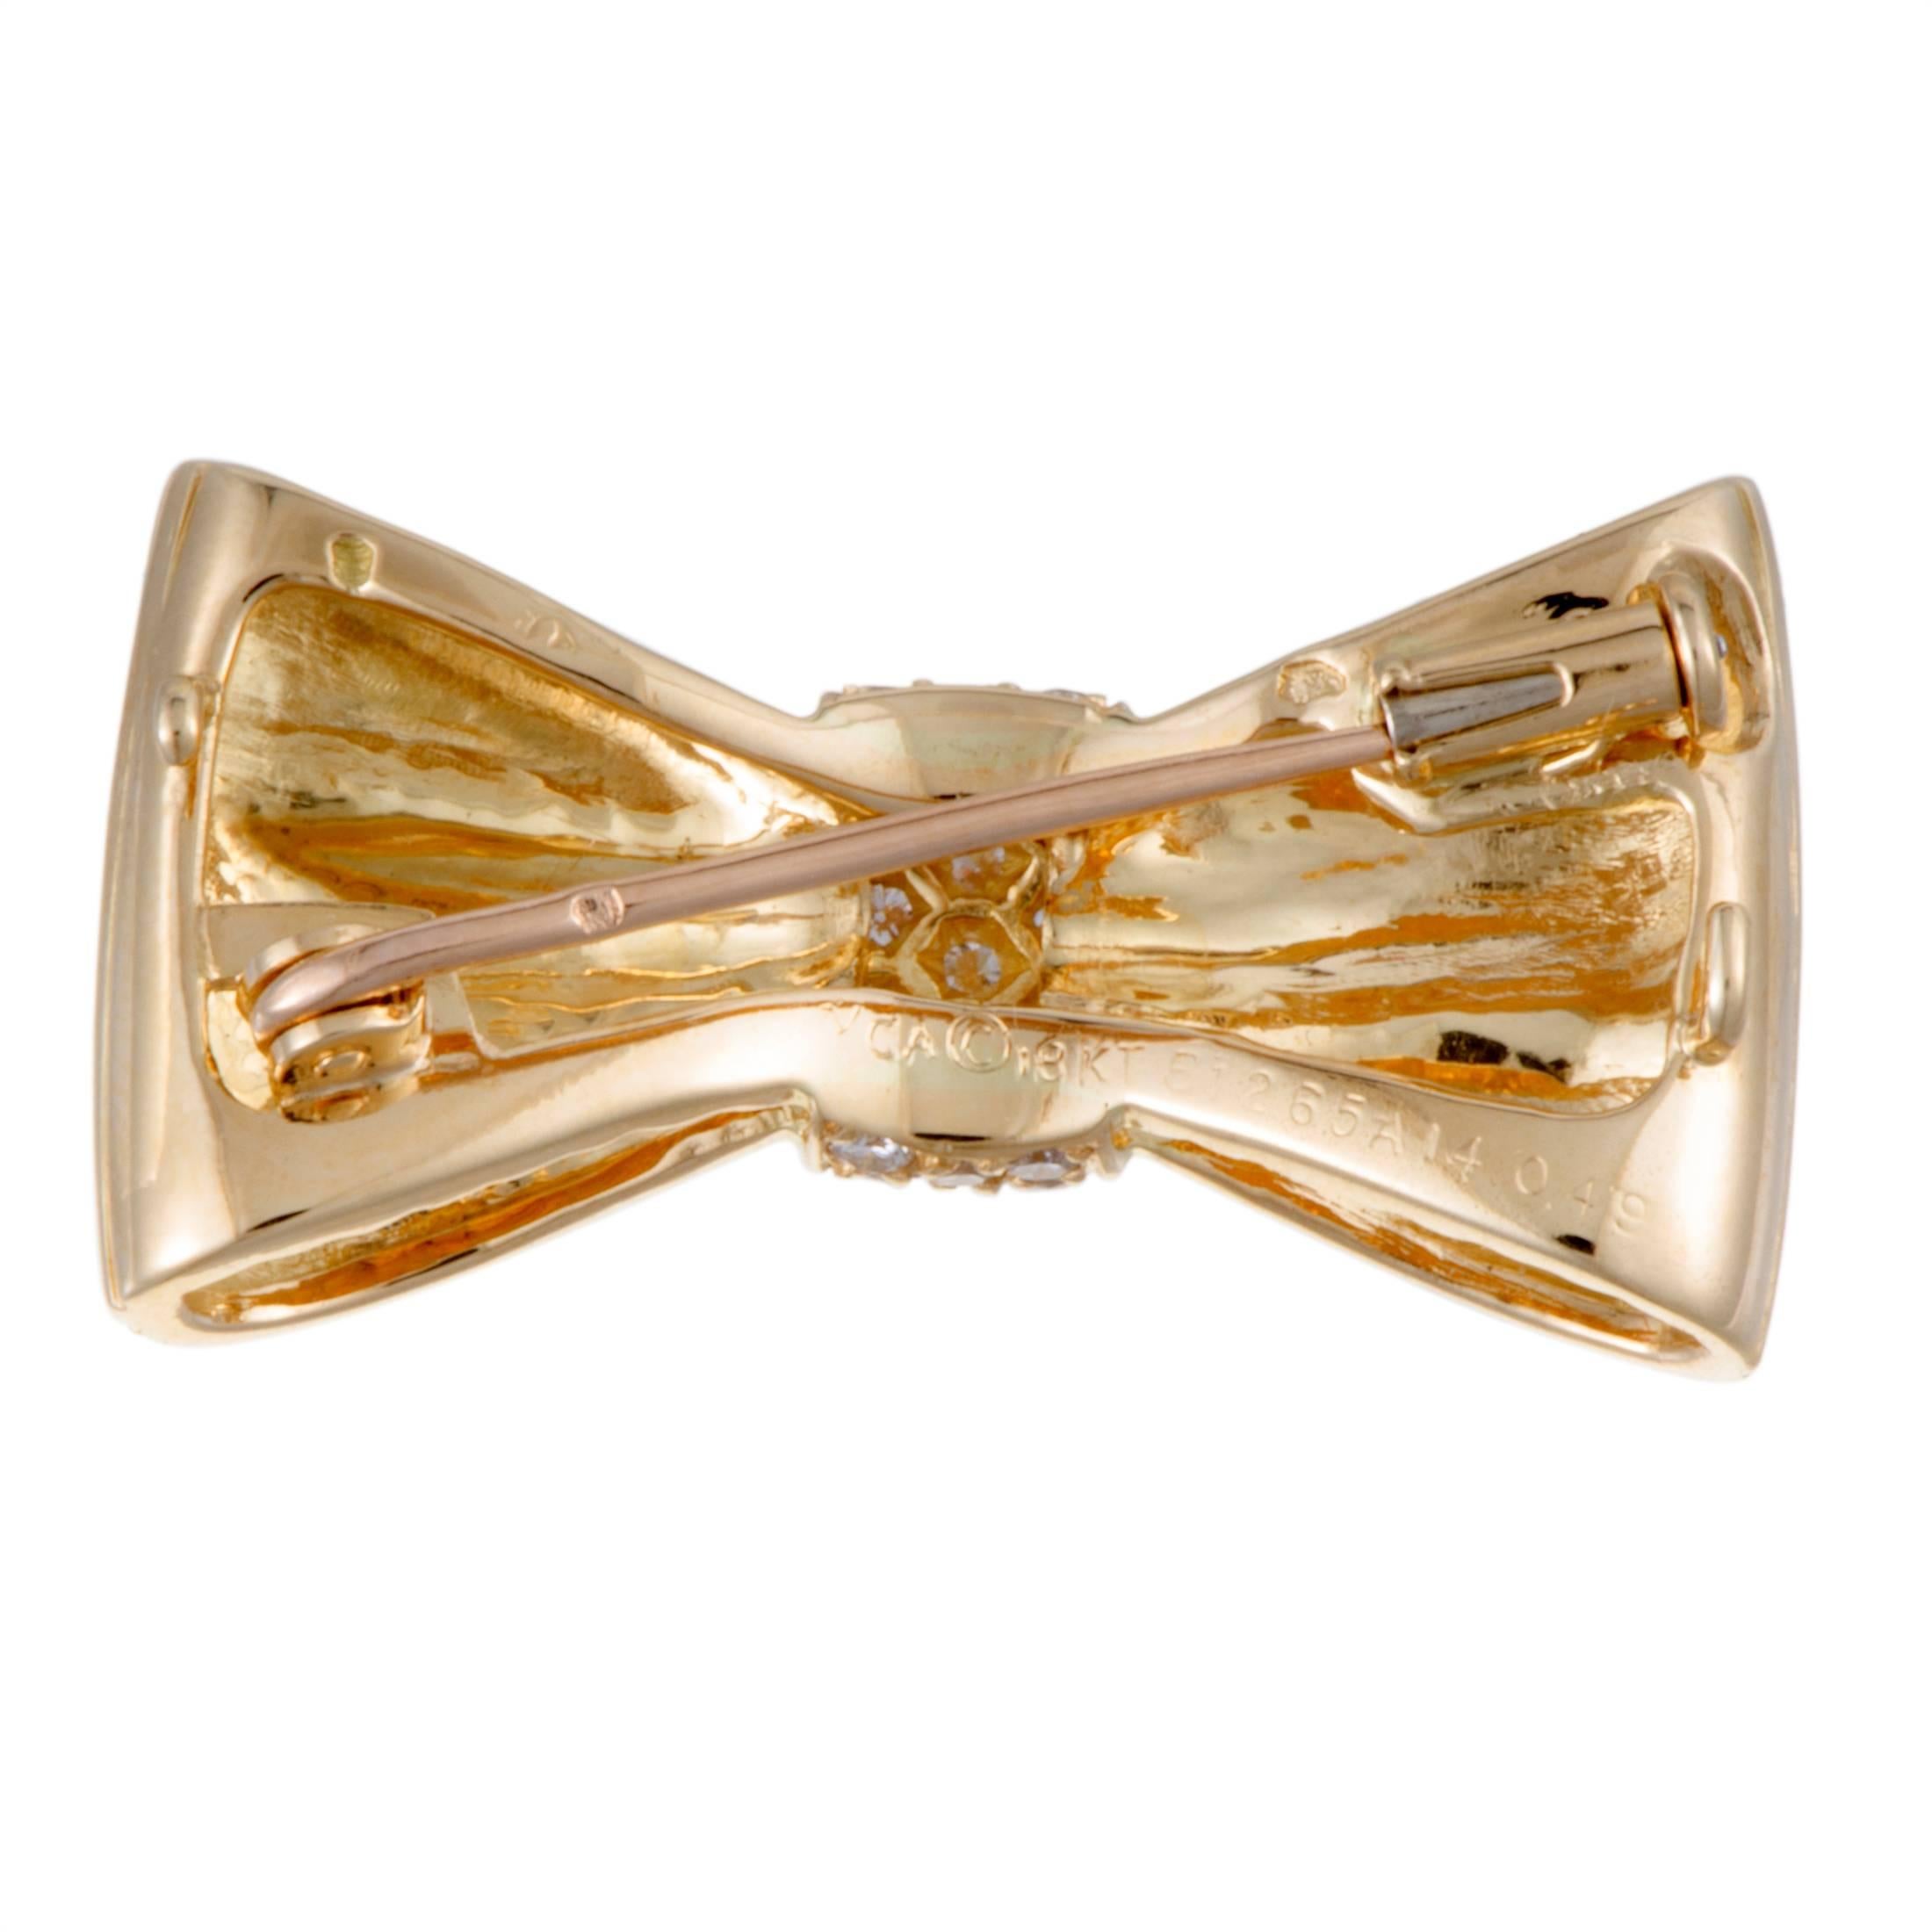 Taking the attractive form of an ever-feminine bow, this beautiful Van Cleef & Arpels brooch will accentuate your style in the most charming manner. Splendidly crafted from radiant 18K yellow gold, the brooch is luxuriously embellished with